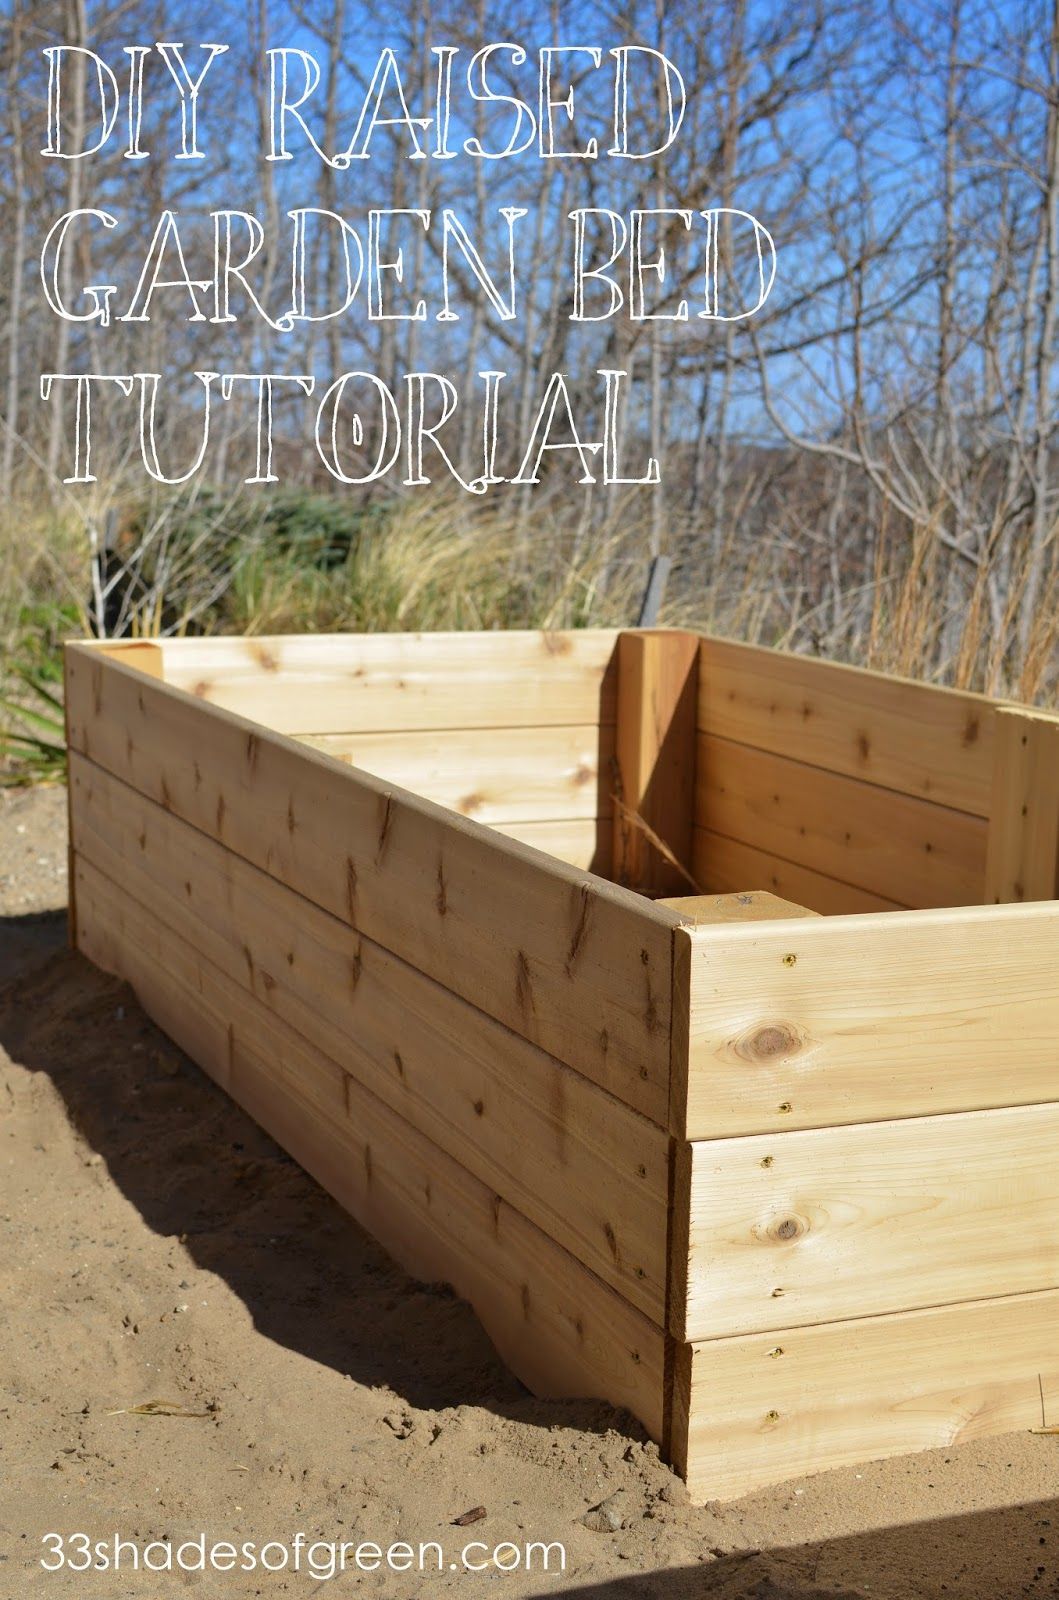 If you follow me on Instagram, you may have seen the photos I posted of the raised garden beds I built a few weeks ago.  They